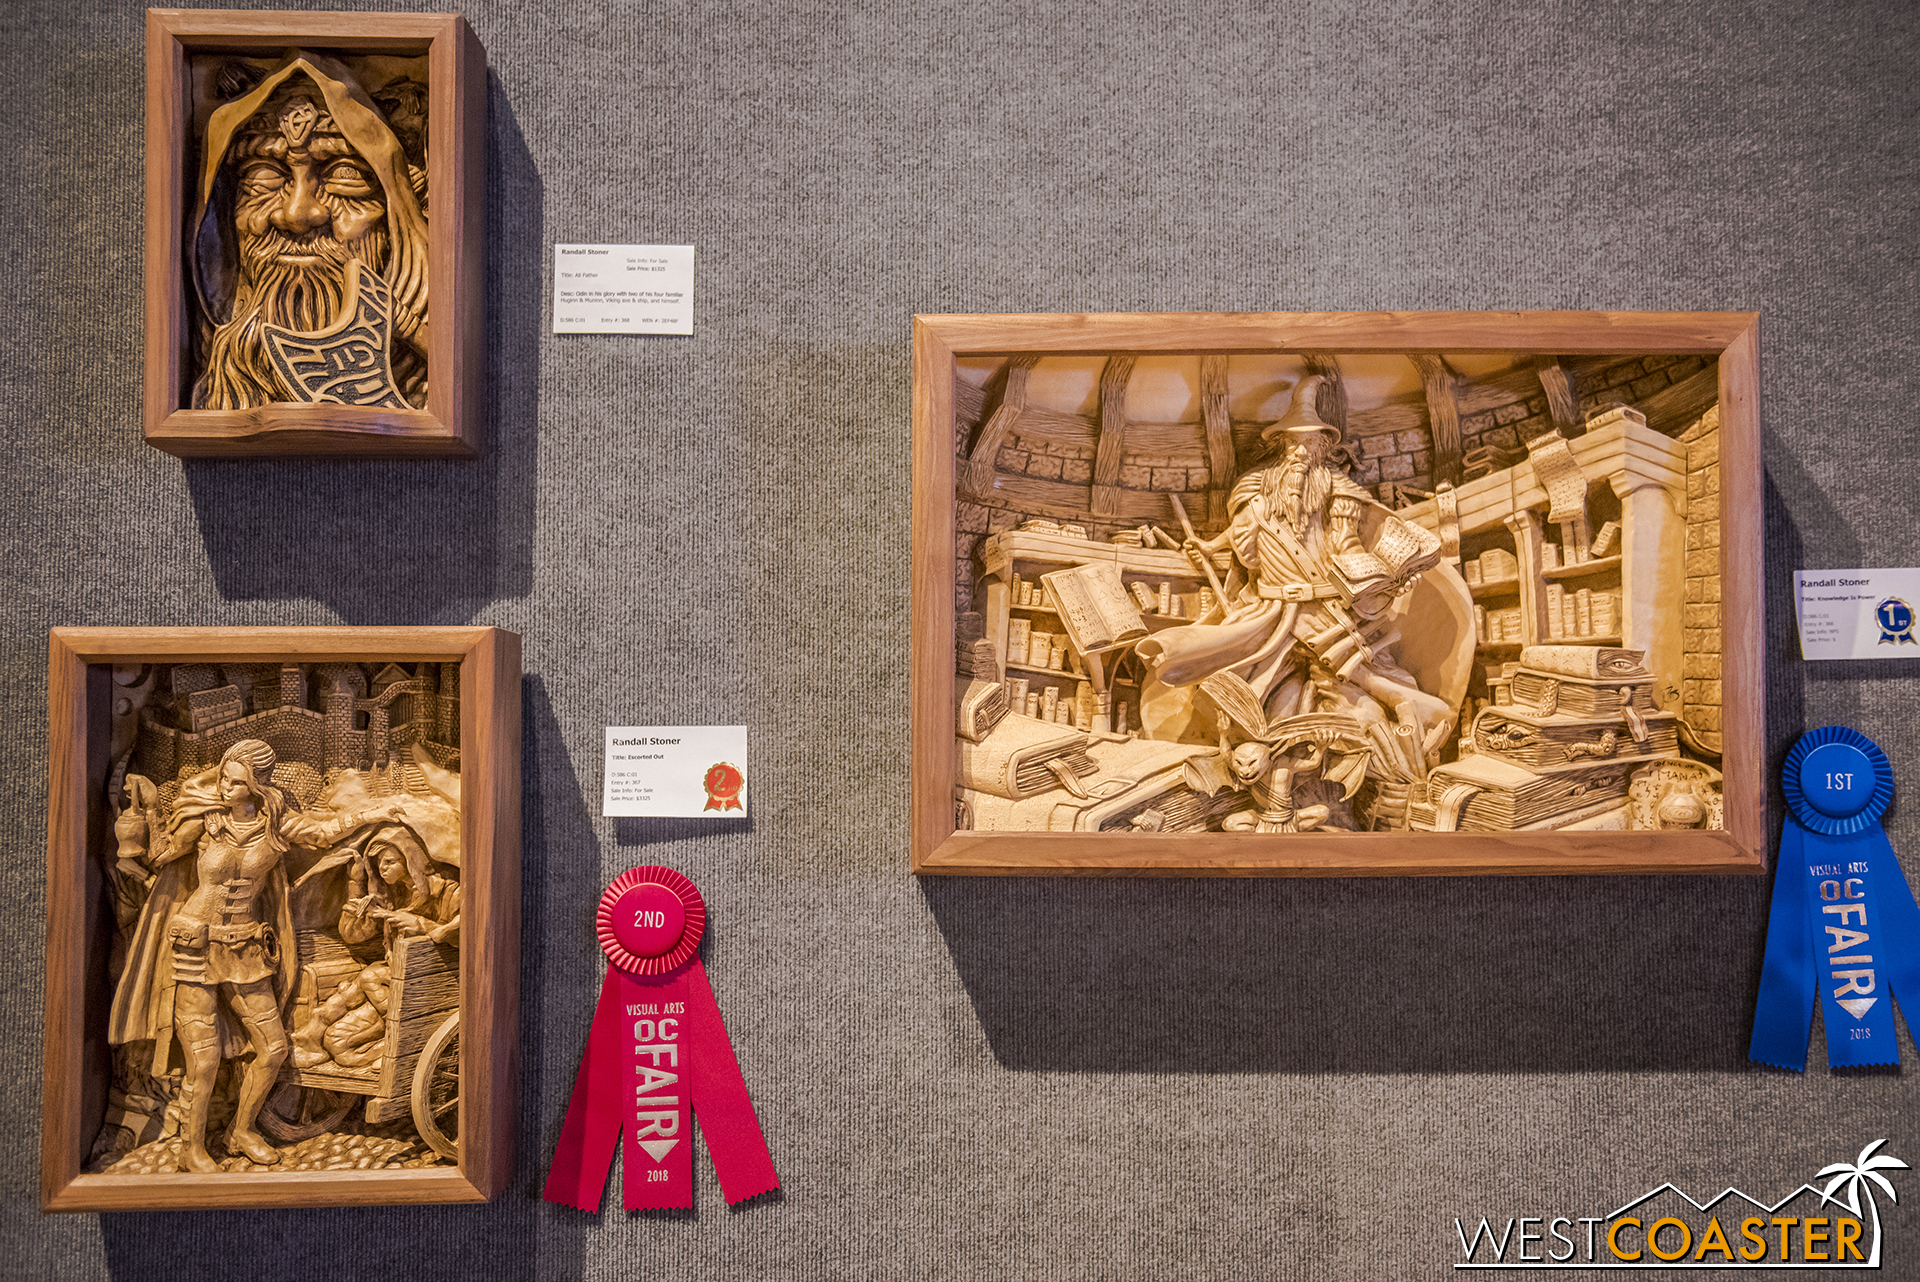  There was also an extensive woodworking exhibit in the same space, on the east side. 